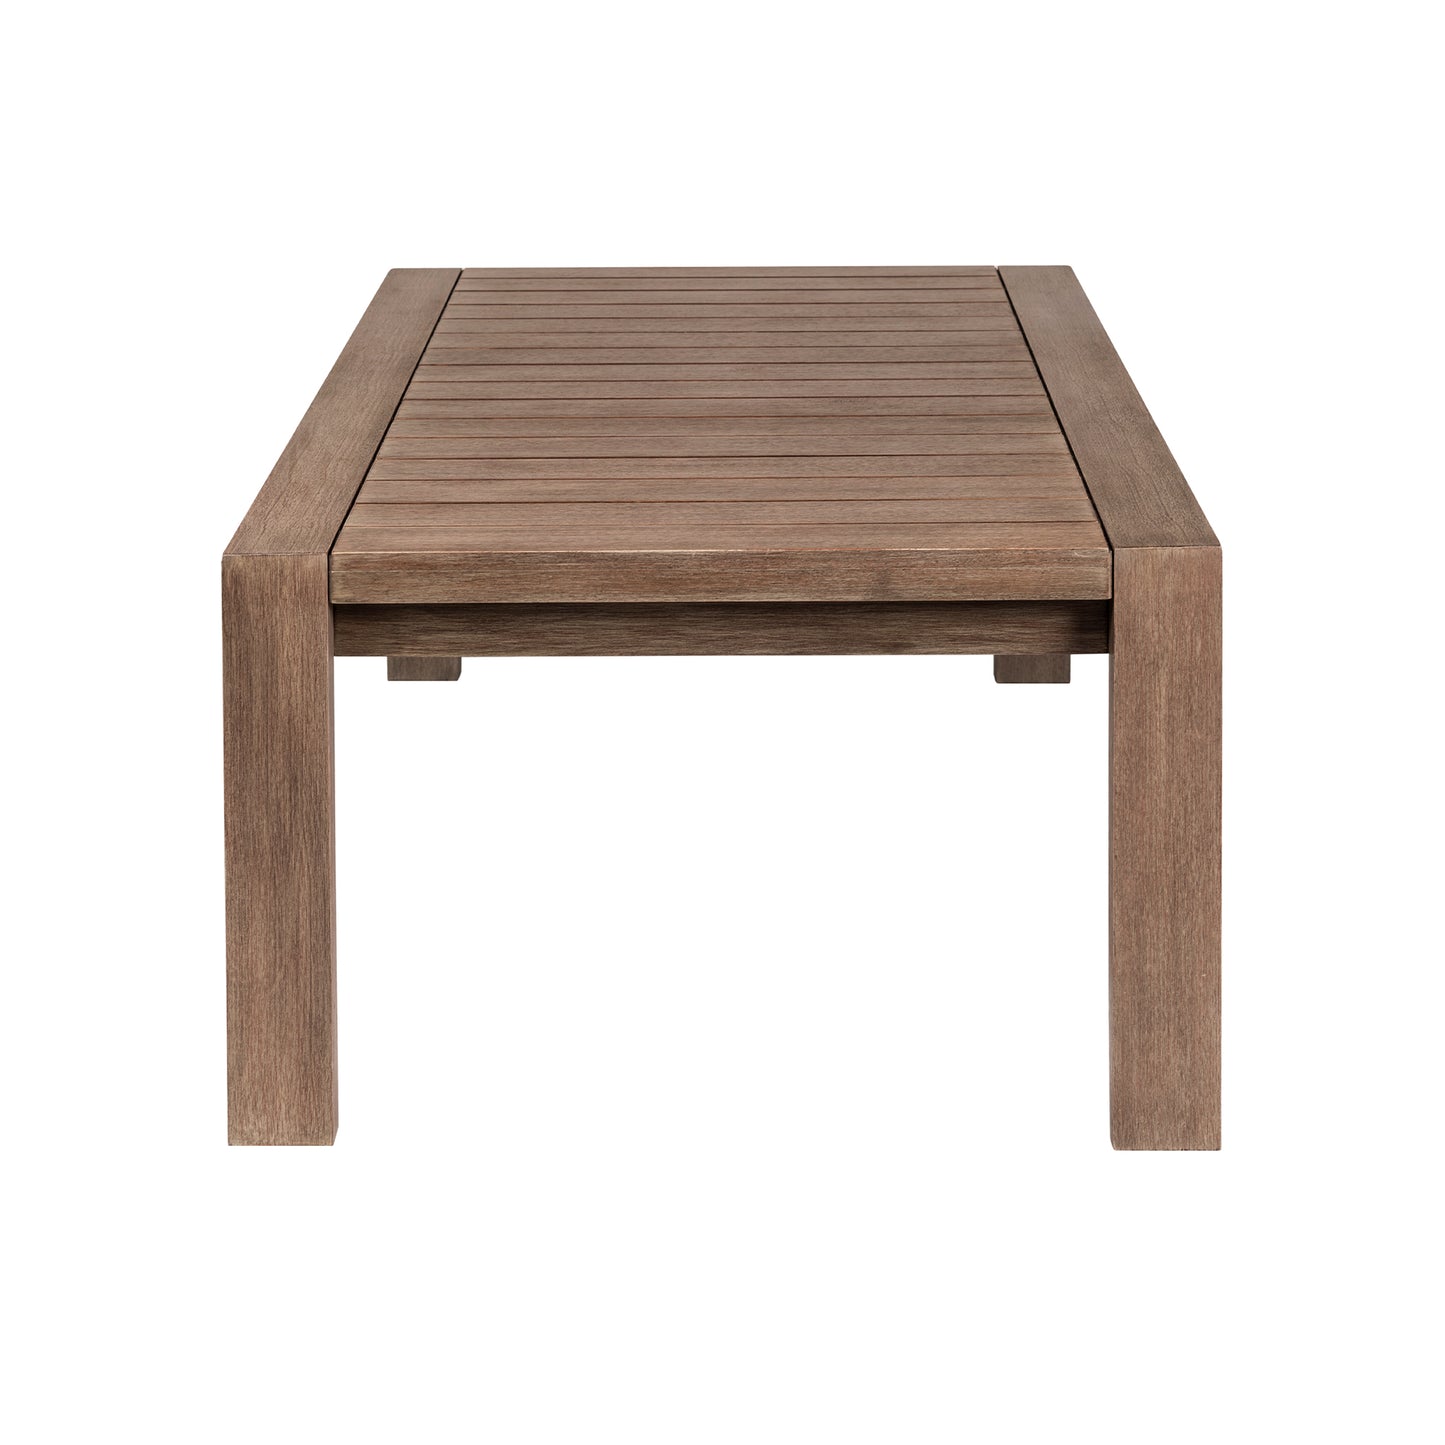 Relic Outdoor Patio Coffee Table in Weathered Eucalyptus Wood